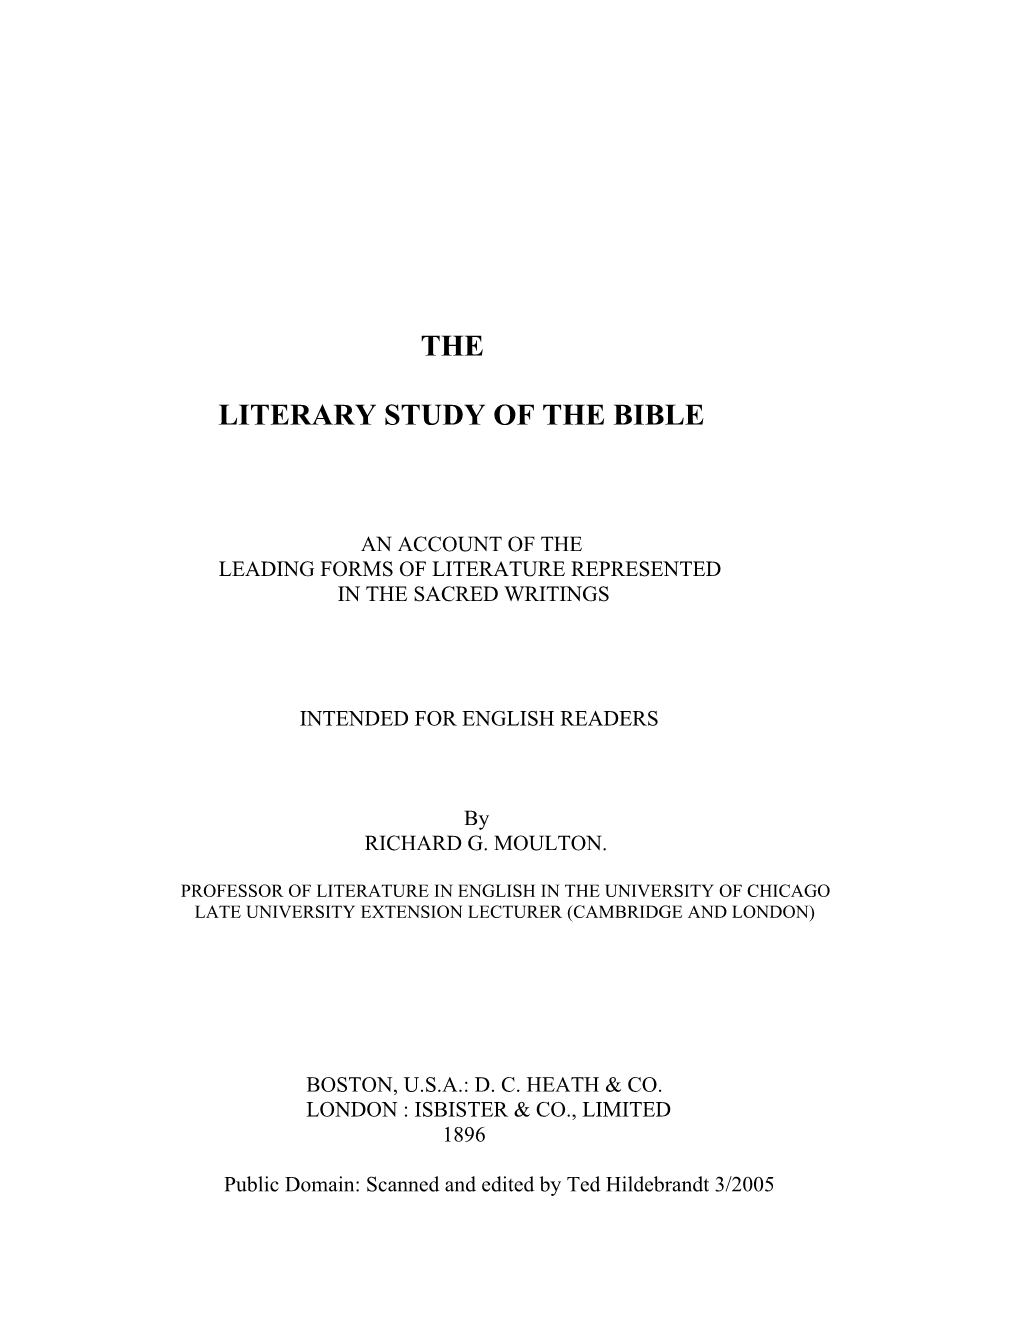 Literary Study of the Bible